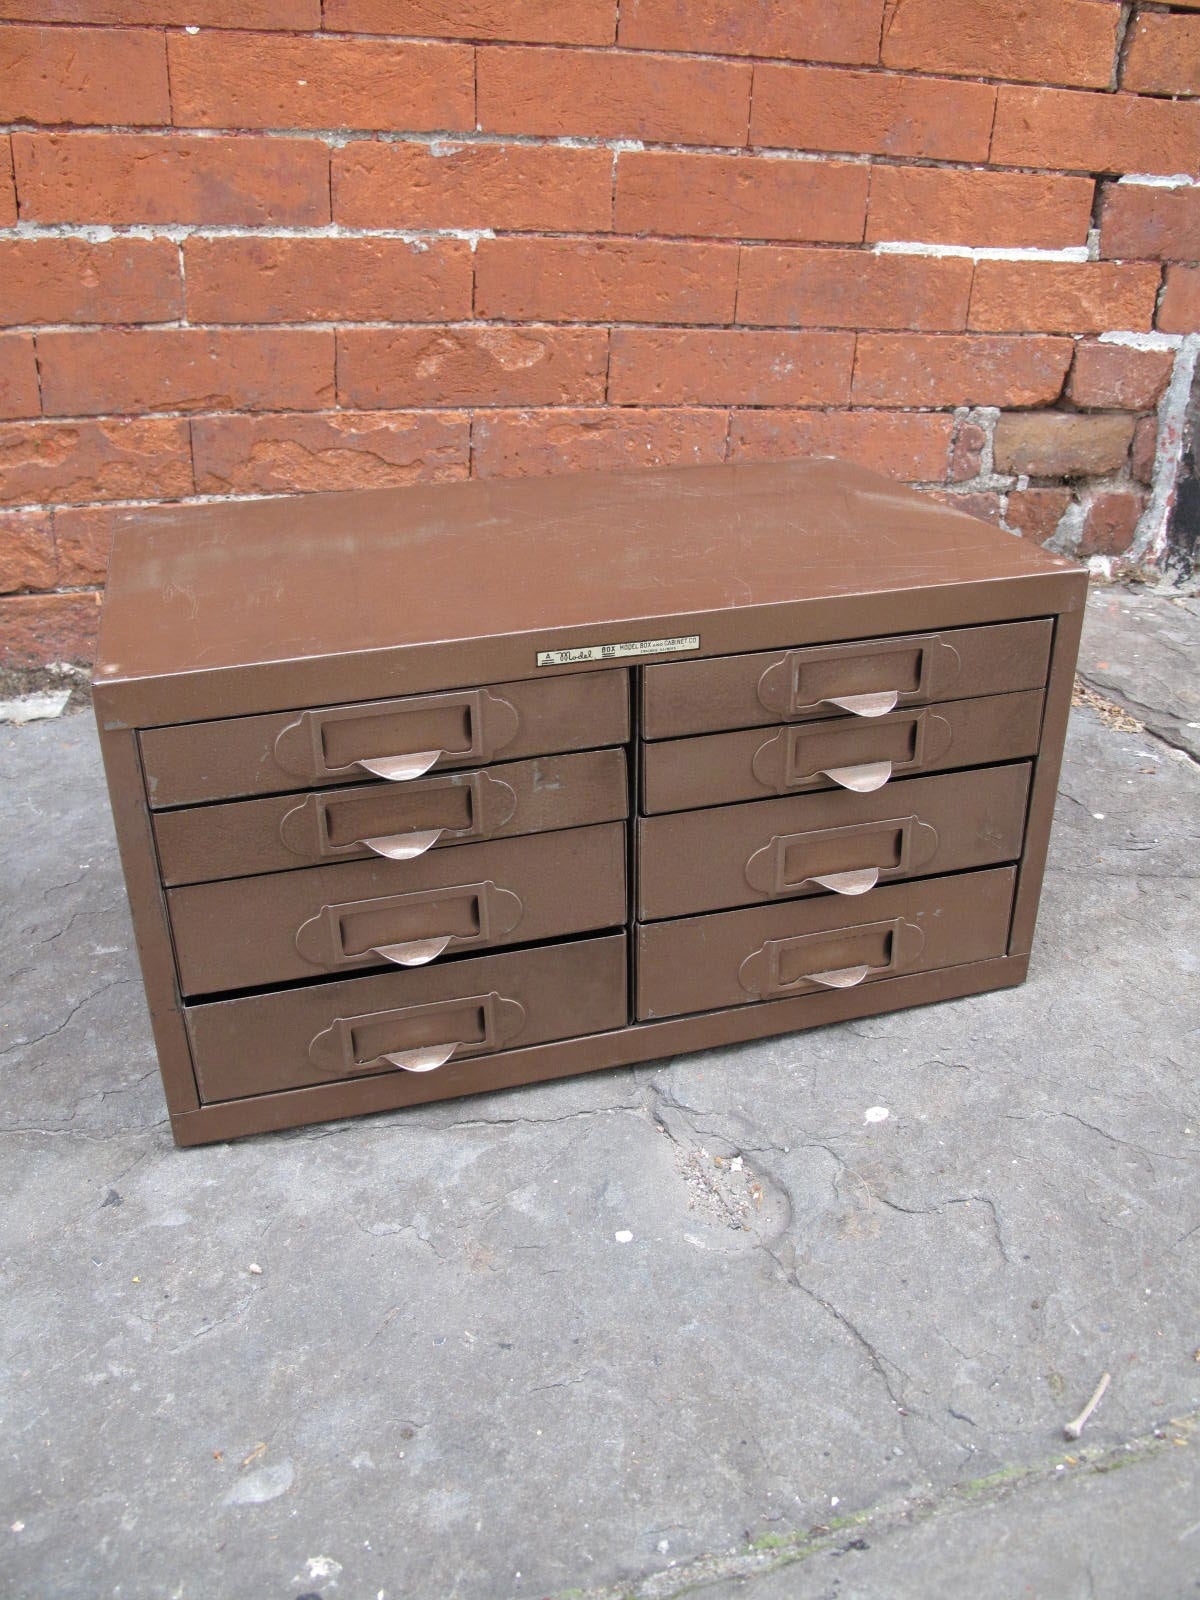 Bronze-hued metal toolbox with 8 drawers made by Model Box & Cabinet Company of Chicago, IL.